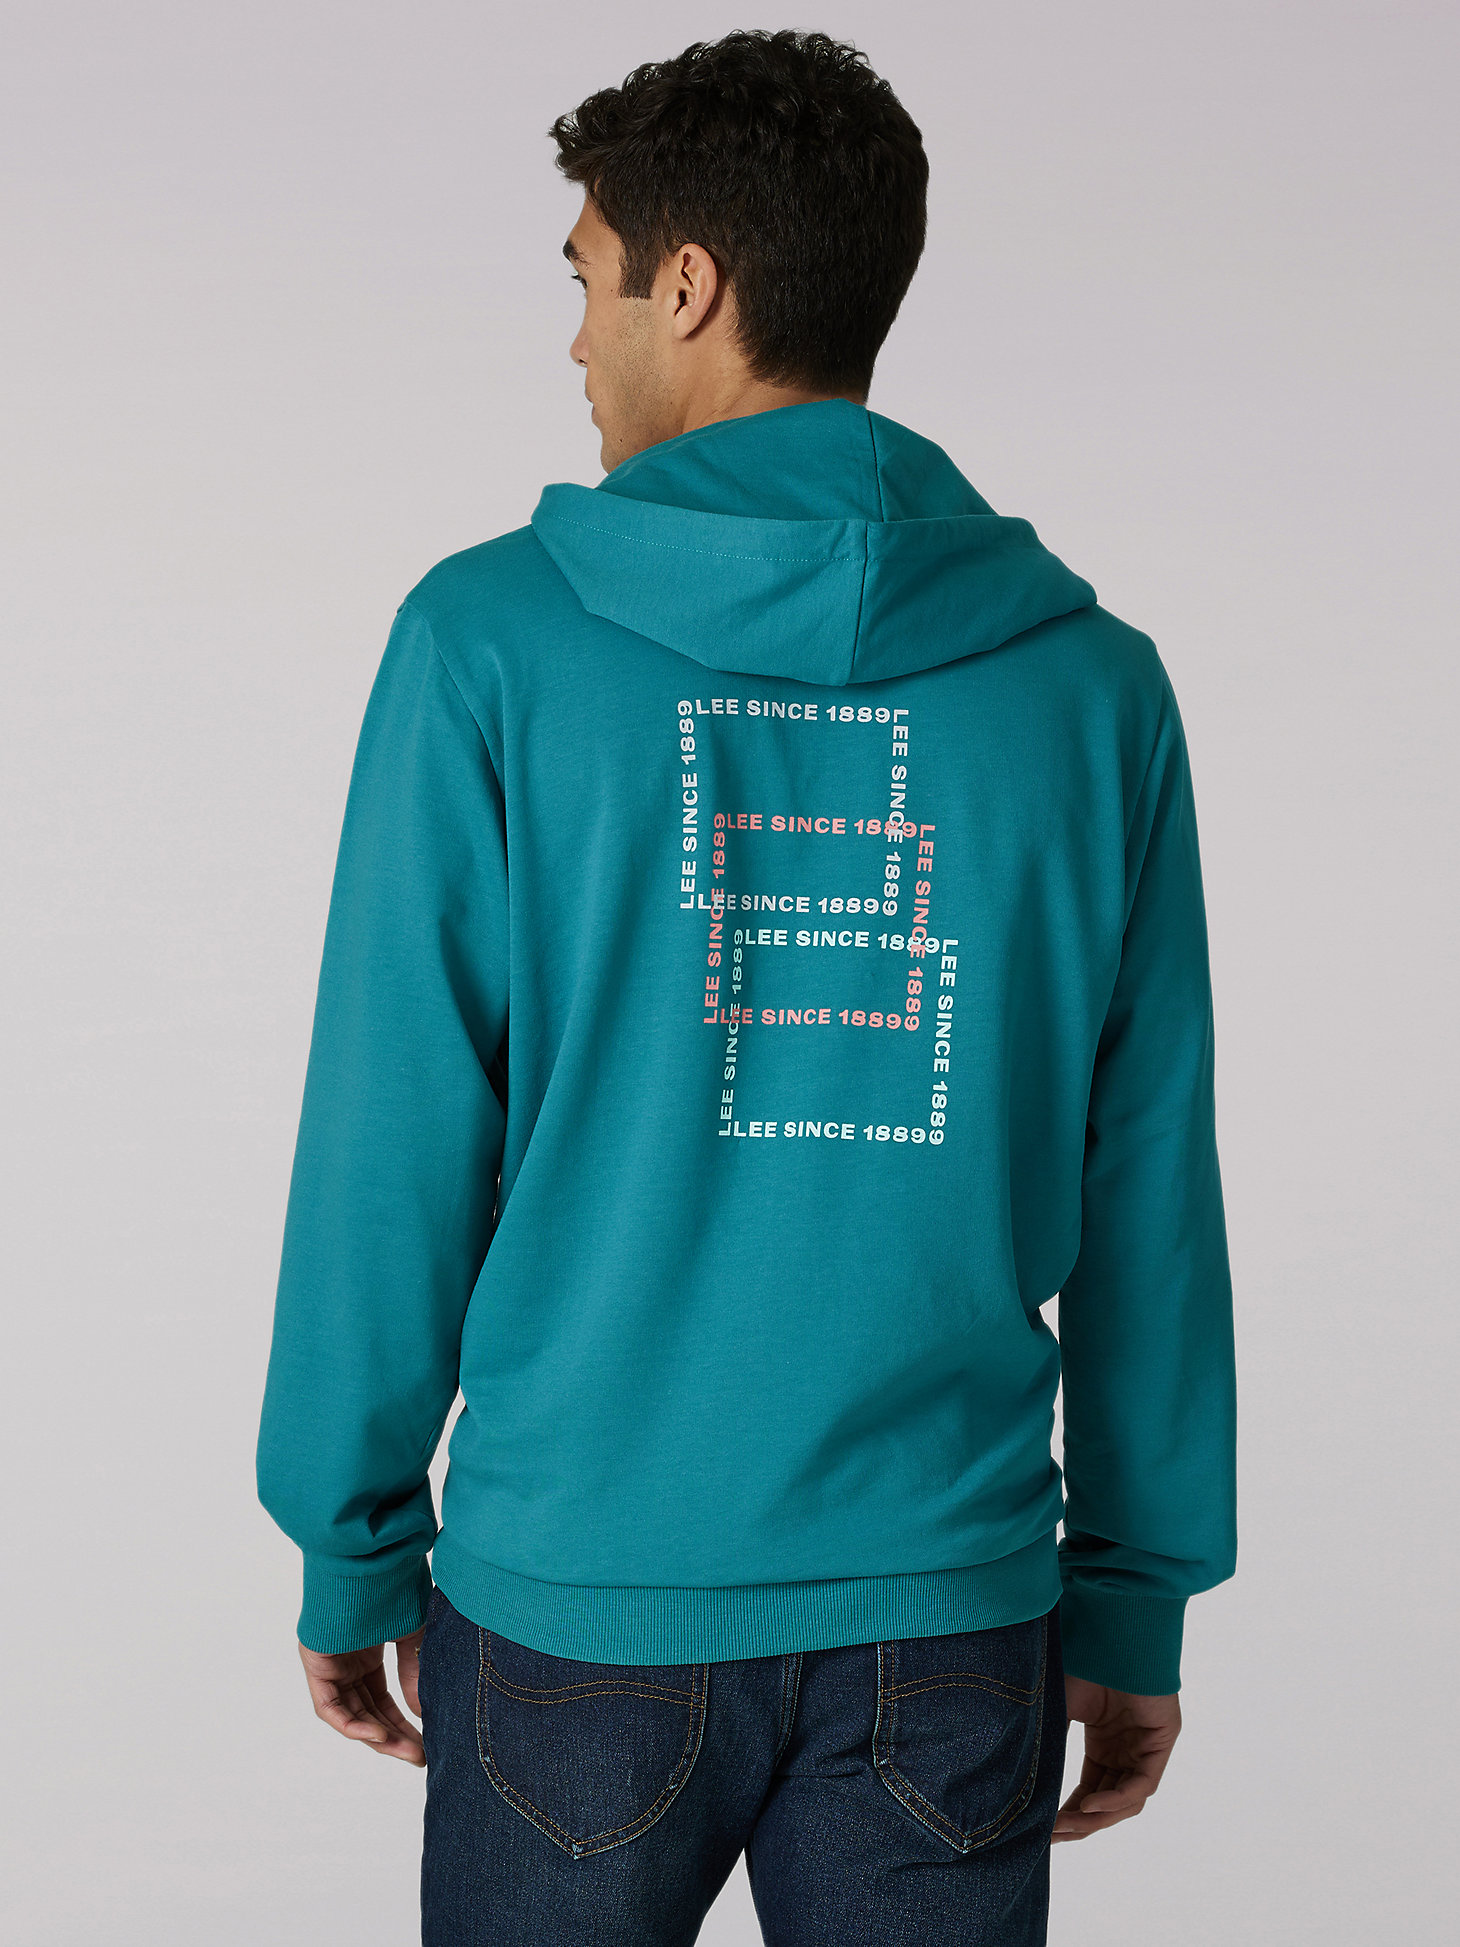 Men's Heritage Lee Graphic Crafted With Purpose Hoodie in Midway Teal alternative view 1